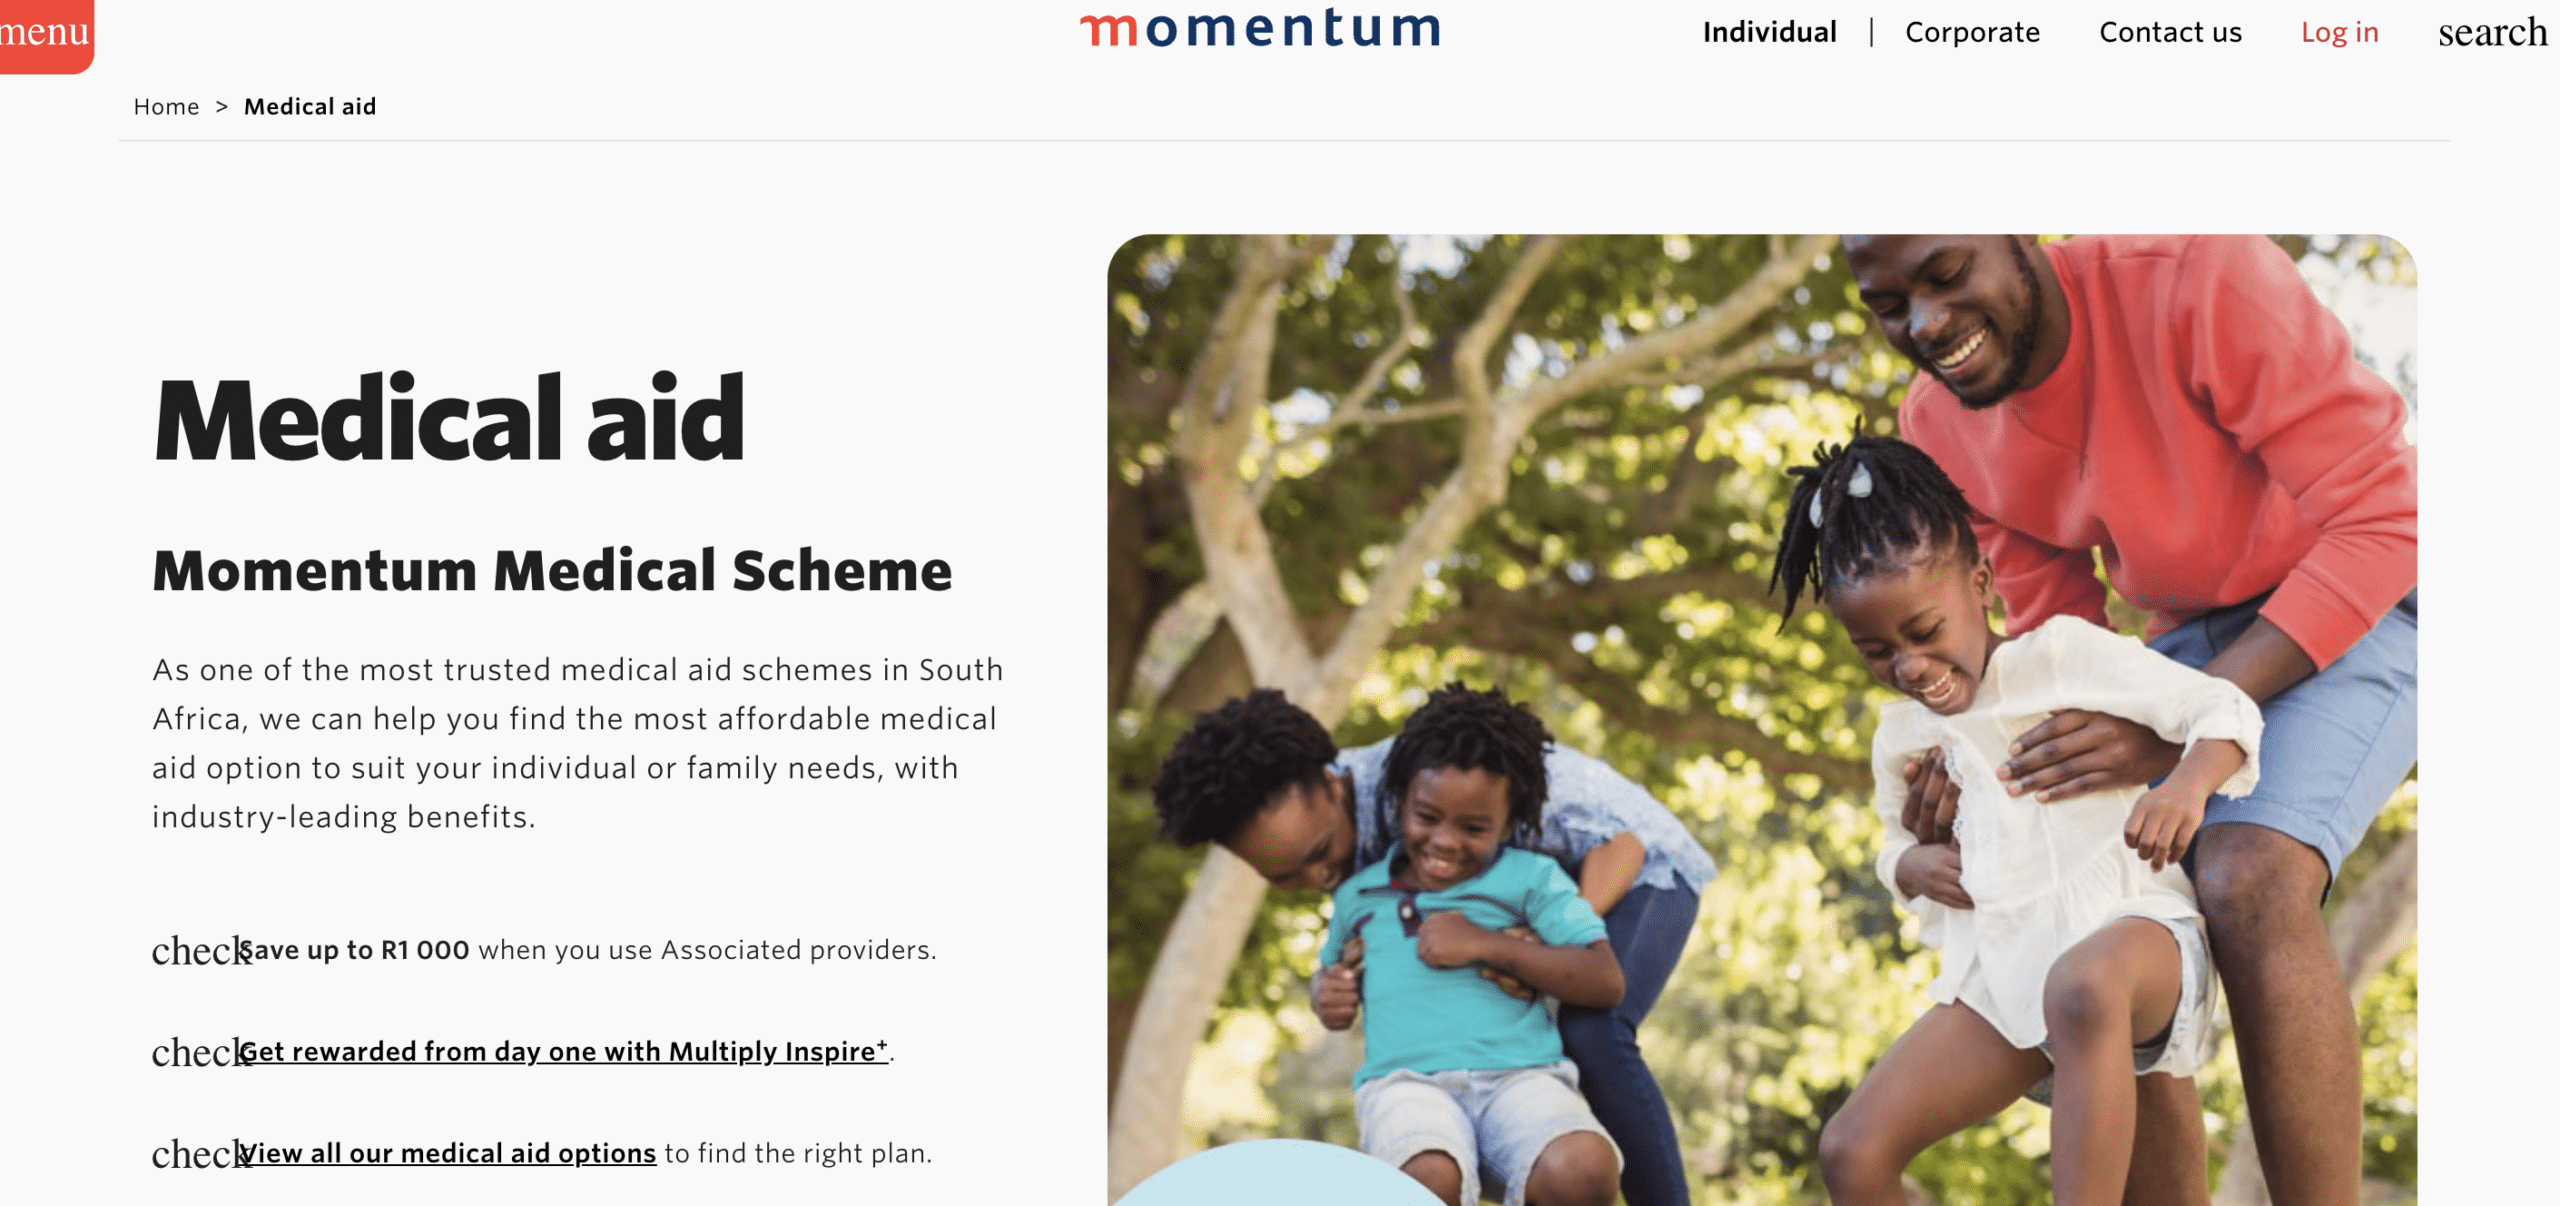 An example of day-to-day benefits: Momentum Health